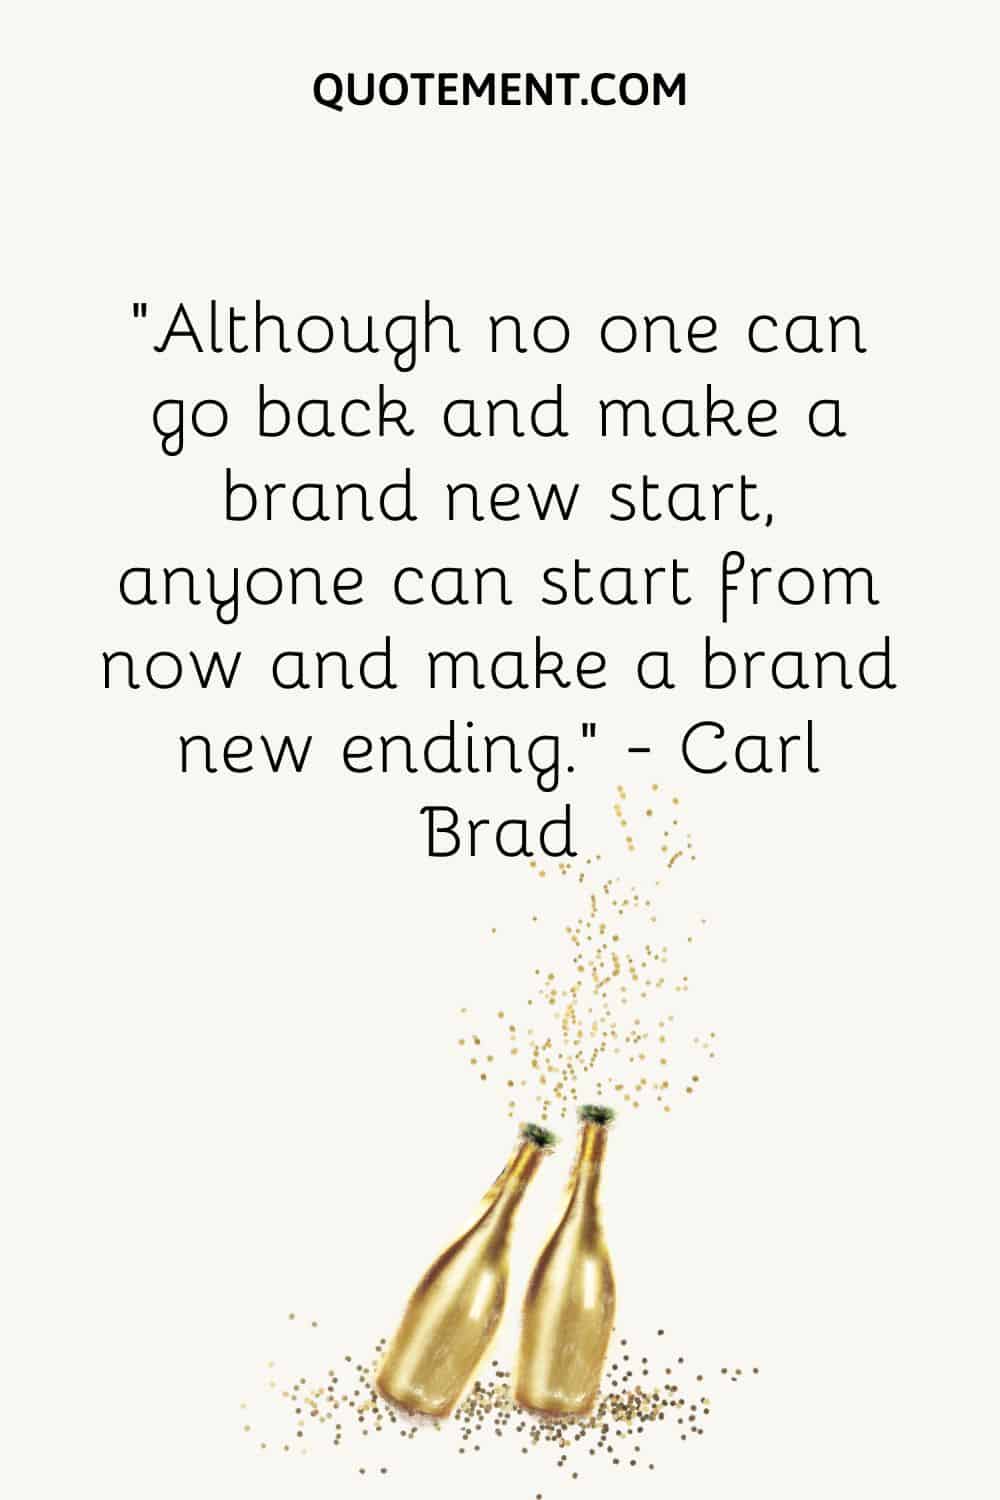 “Although no one can go back and make a brand new start, anyone can start from now and make a brand new ending.” ― Carl Brad